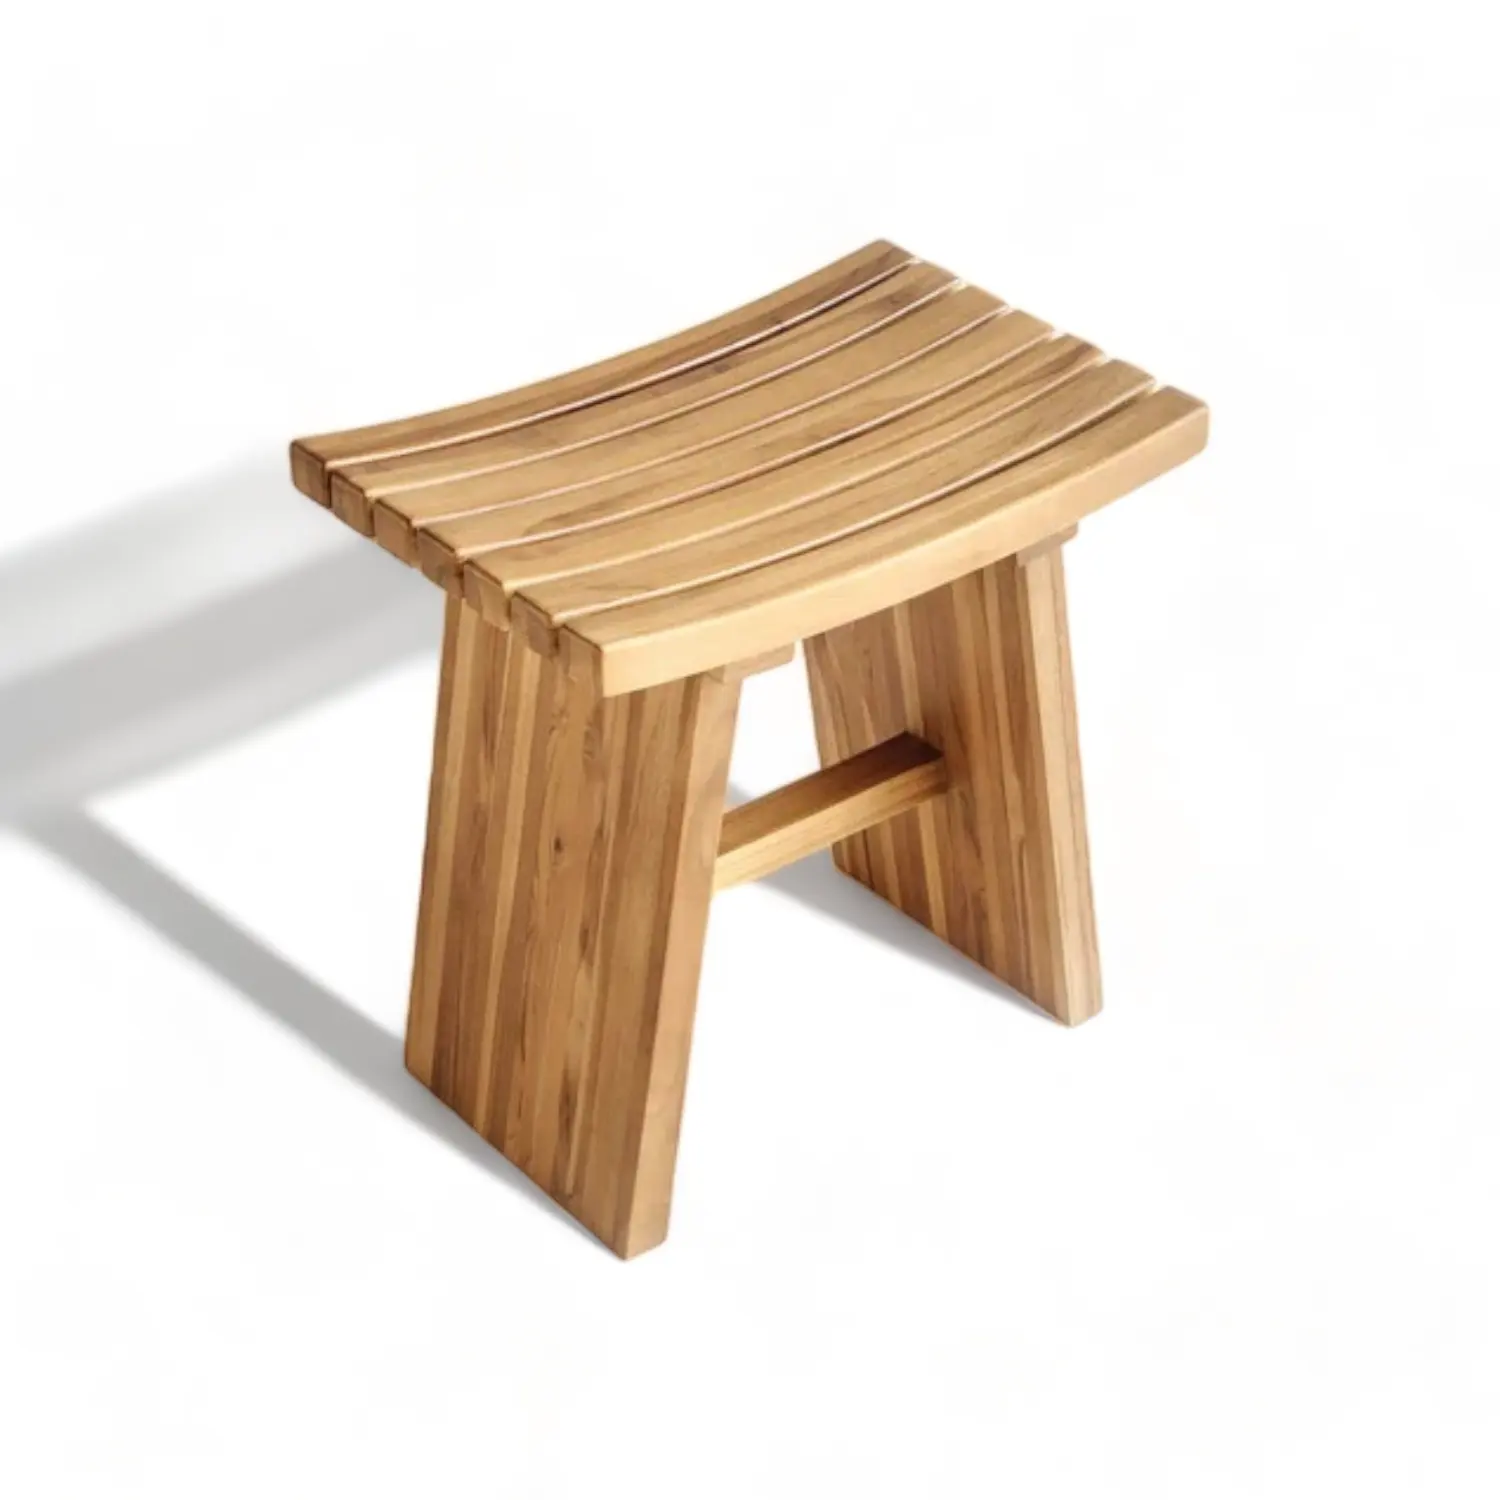 Furniture Wood Entryway Handmade wooden bench Natural Wood Shower Stool in Curved seat for Indoor and Outdoor Teak Shower Bench